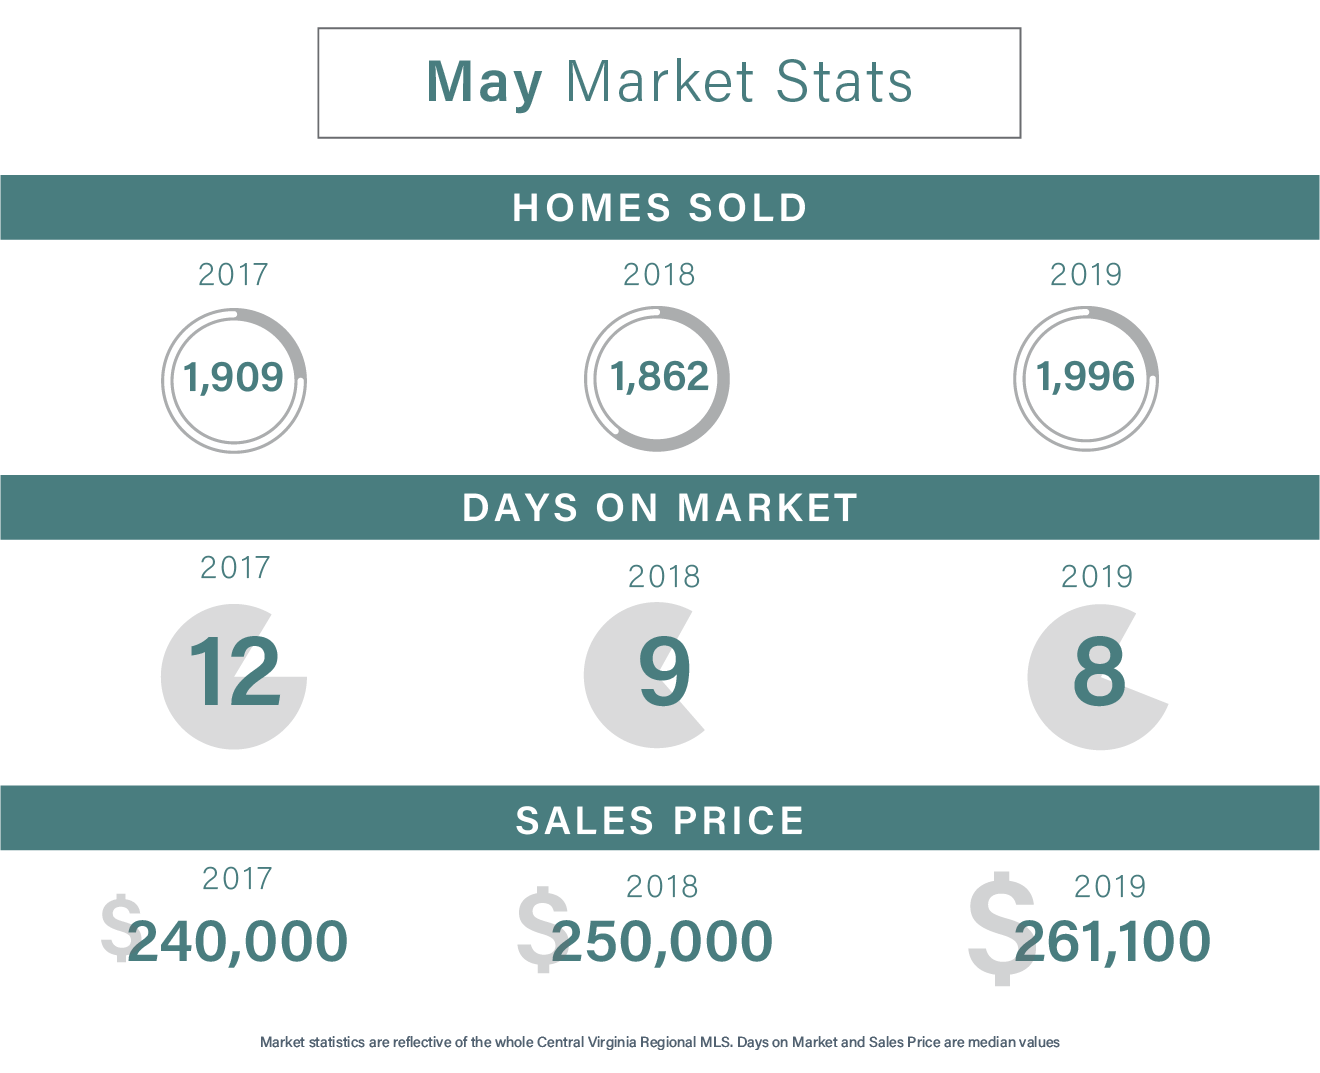 Housing Statistics from May of 2019, 2018, and 2017